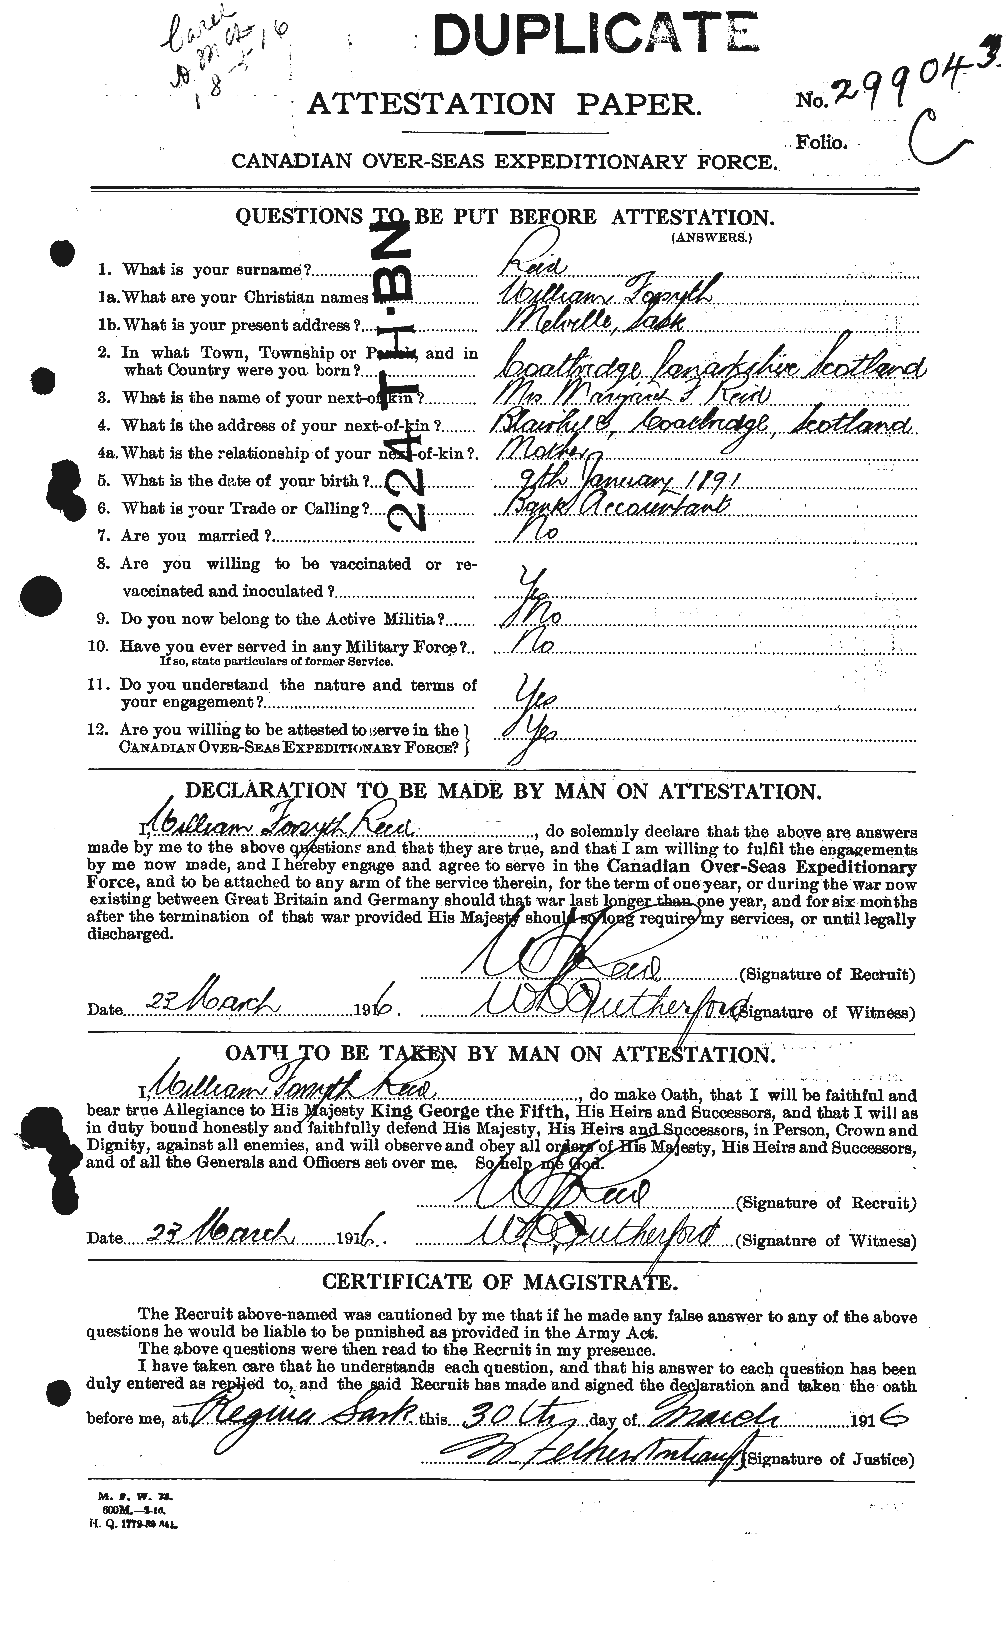 Personnel Records of the First World War - CEF 596984a